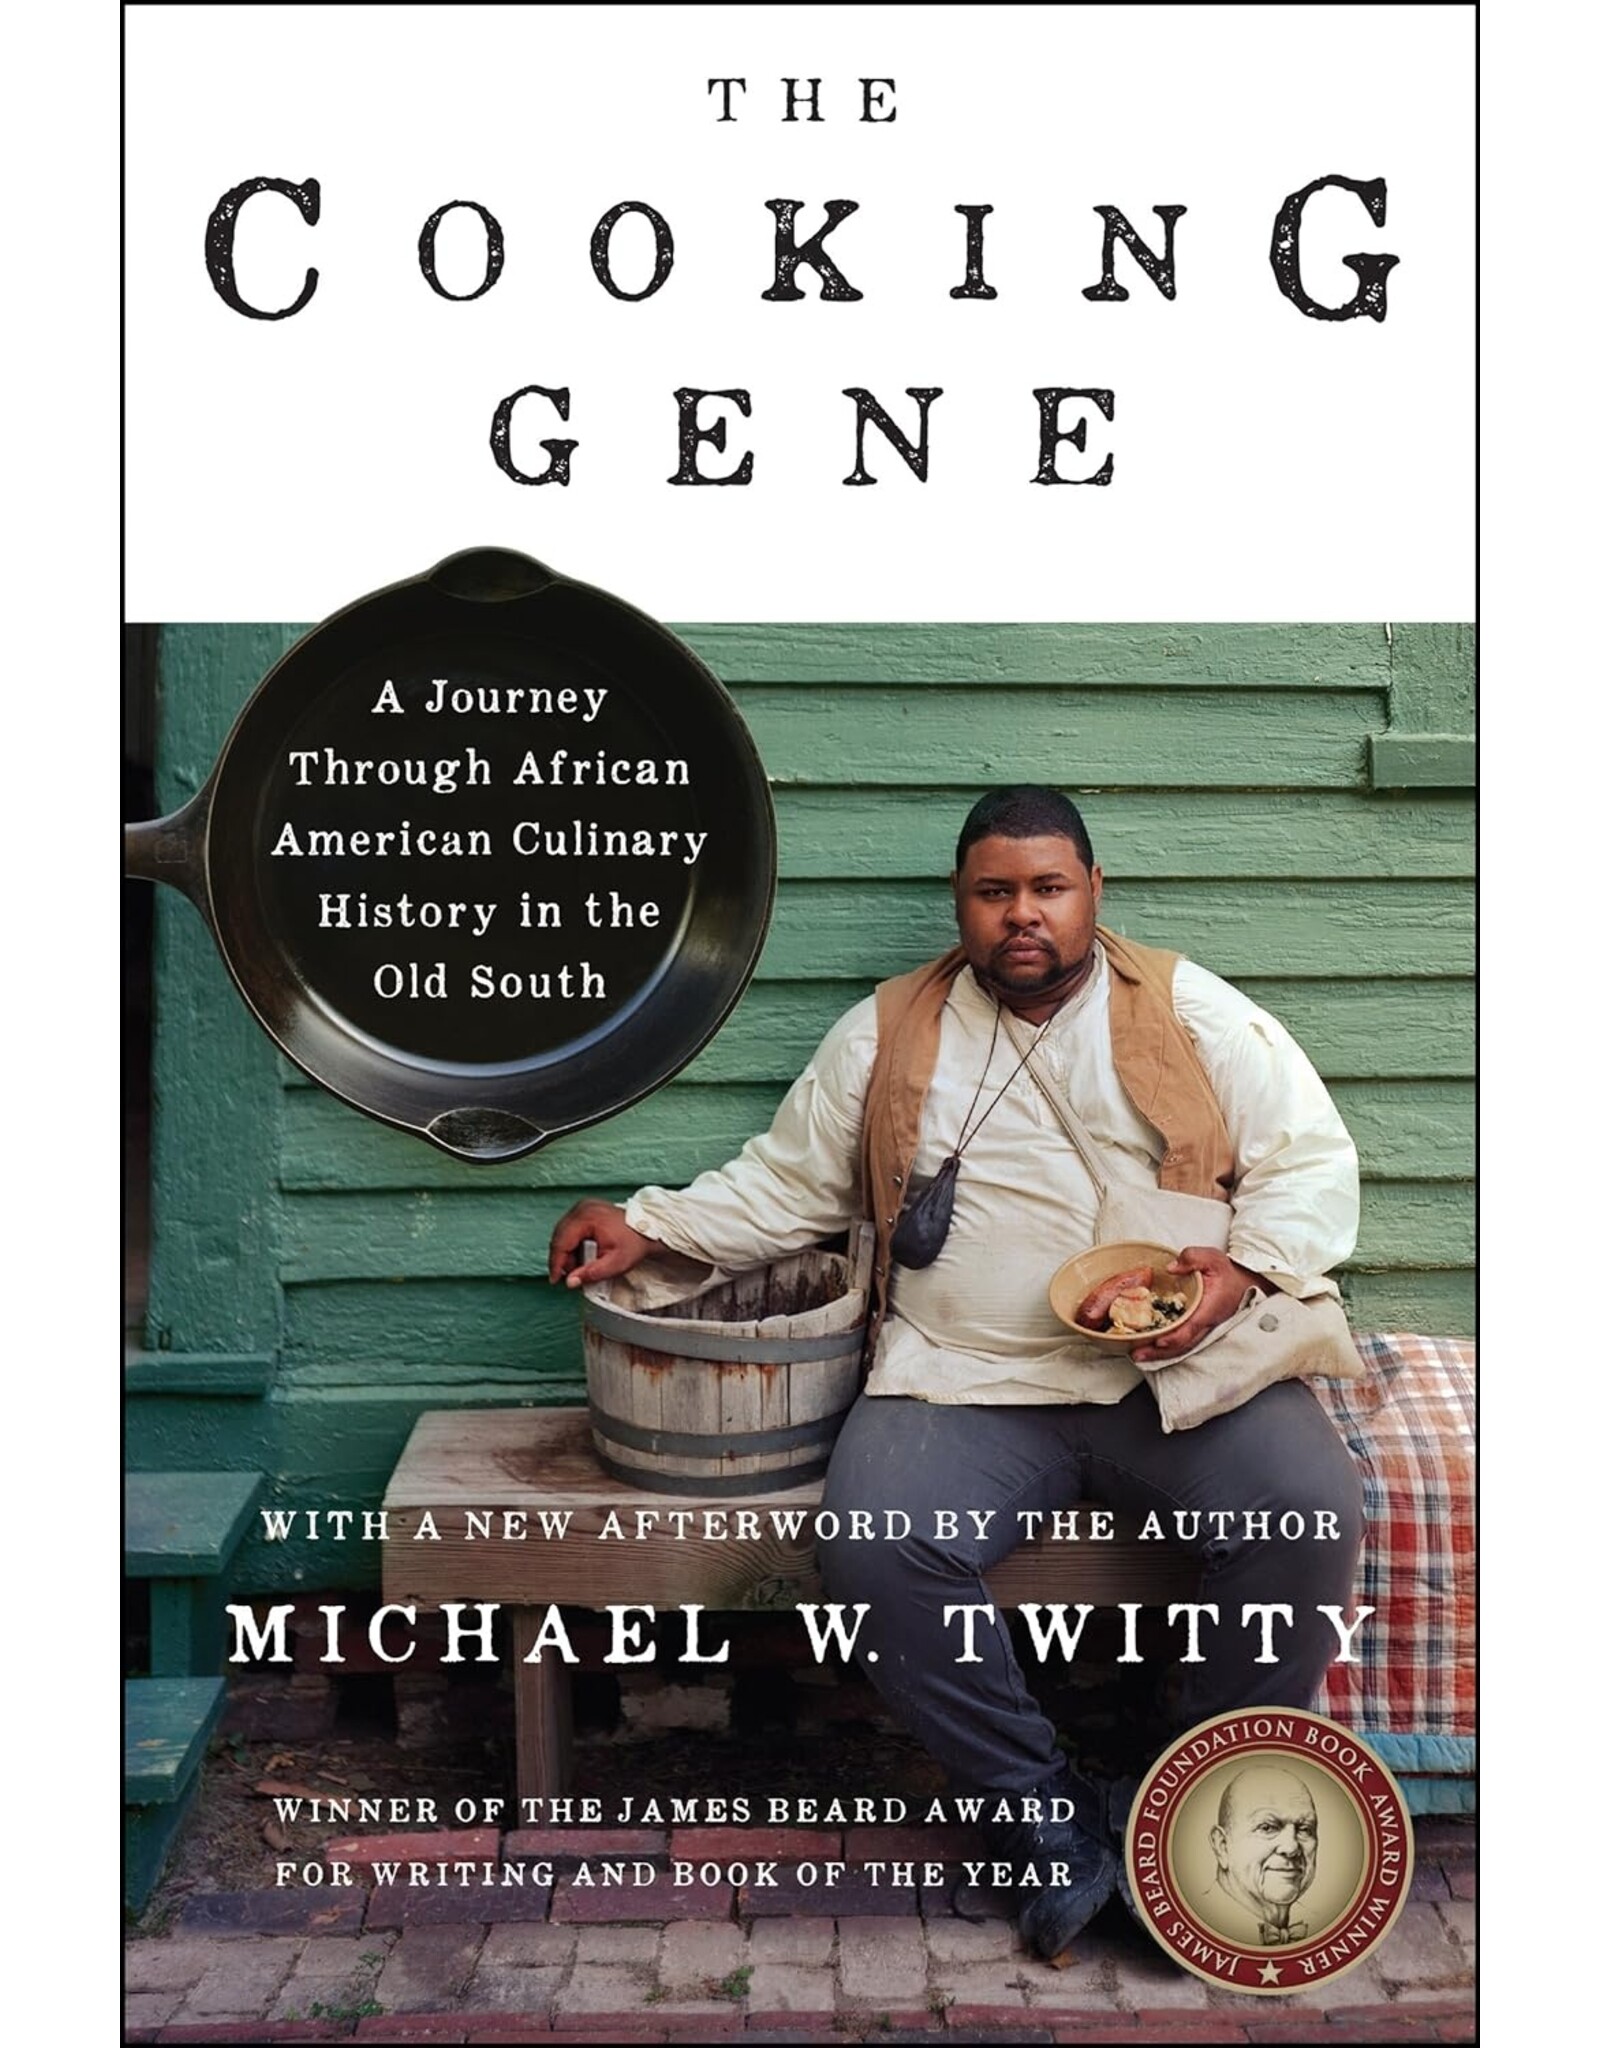 Cookbooks & Culinary History The Cooking Gene: A Journey Through African American Culinary History in the Old South